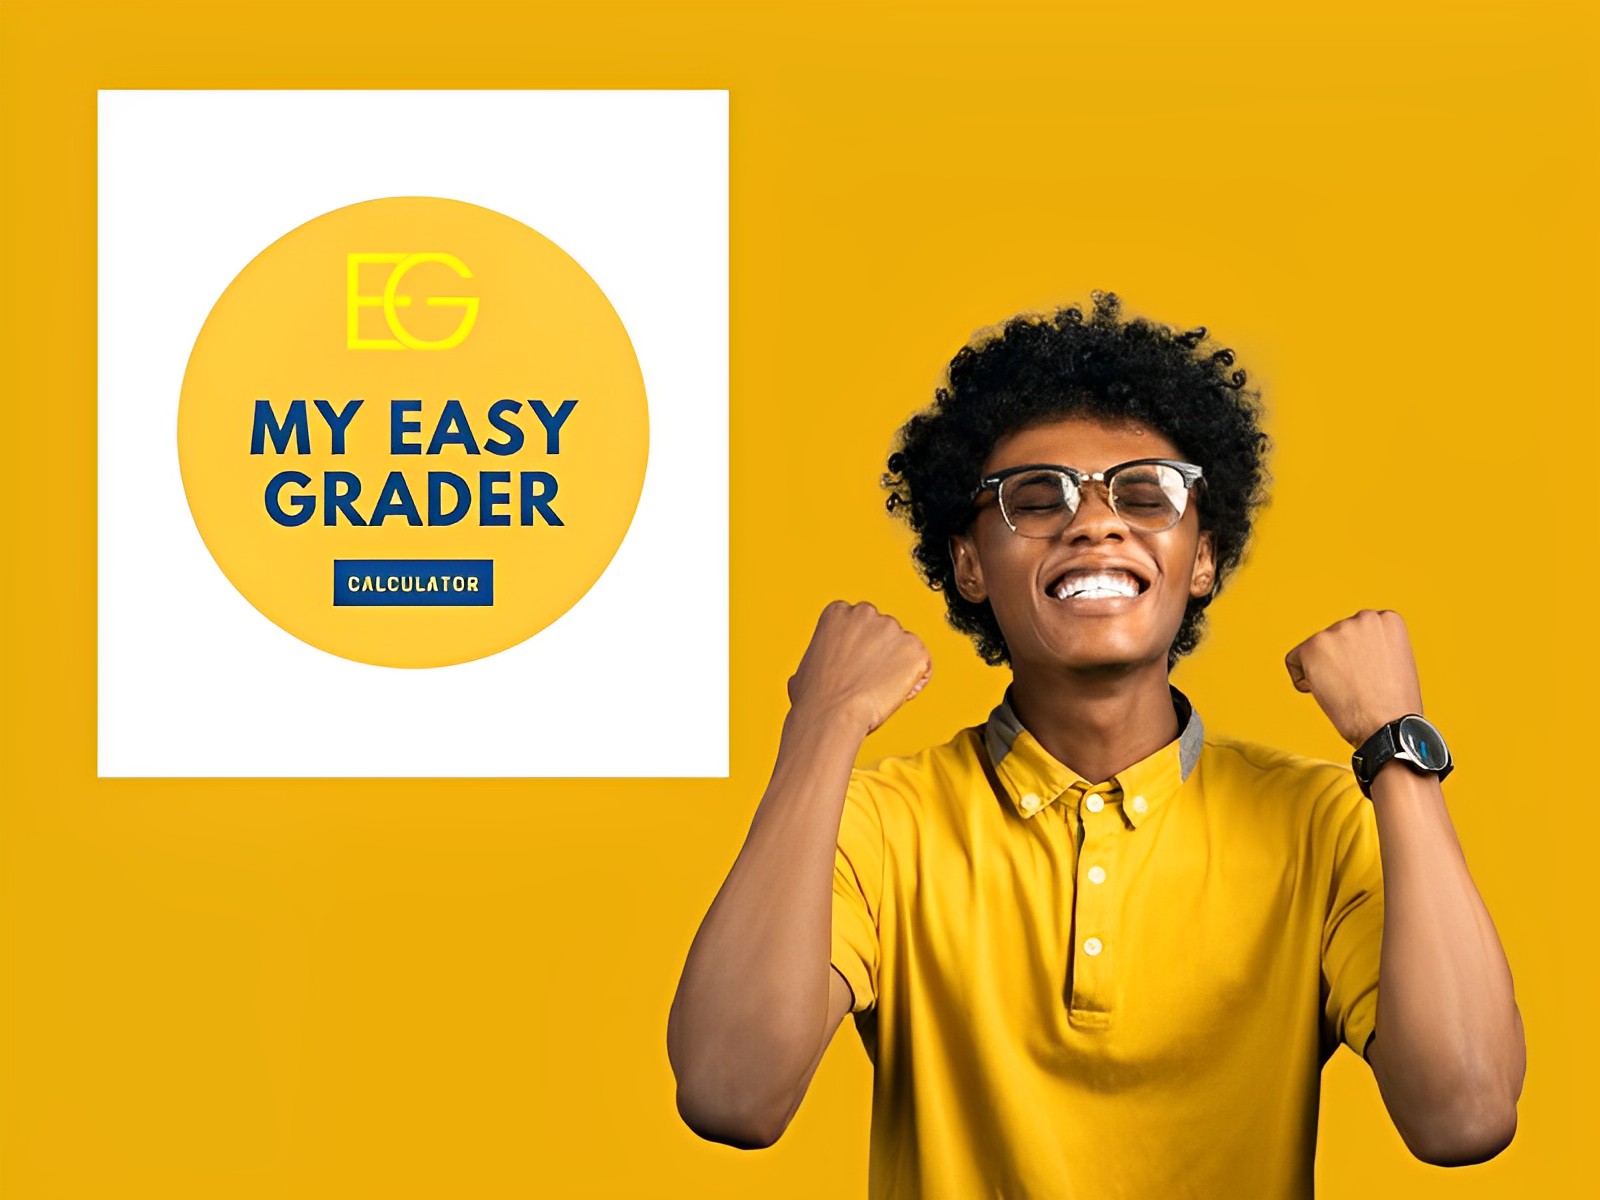 My Easy Grader Calculator – The Simple Tool for Accurate Grading